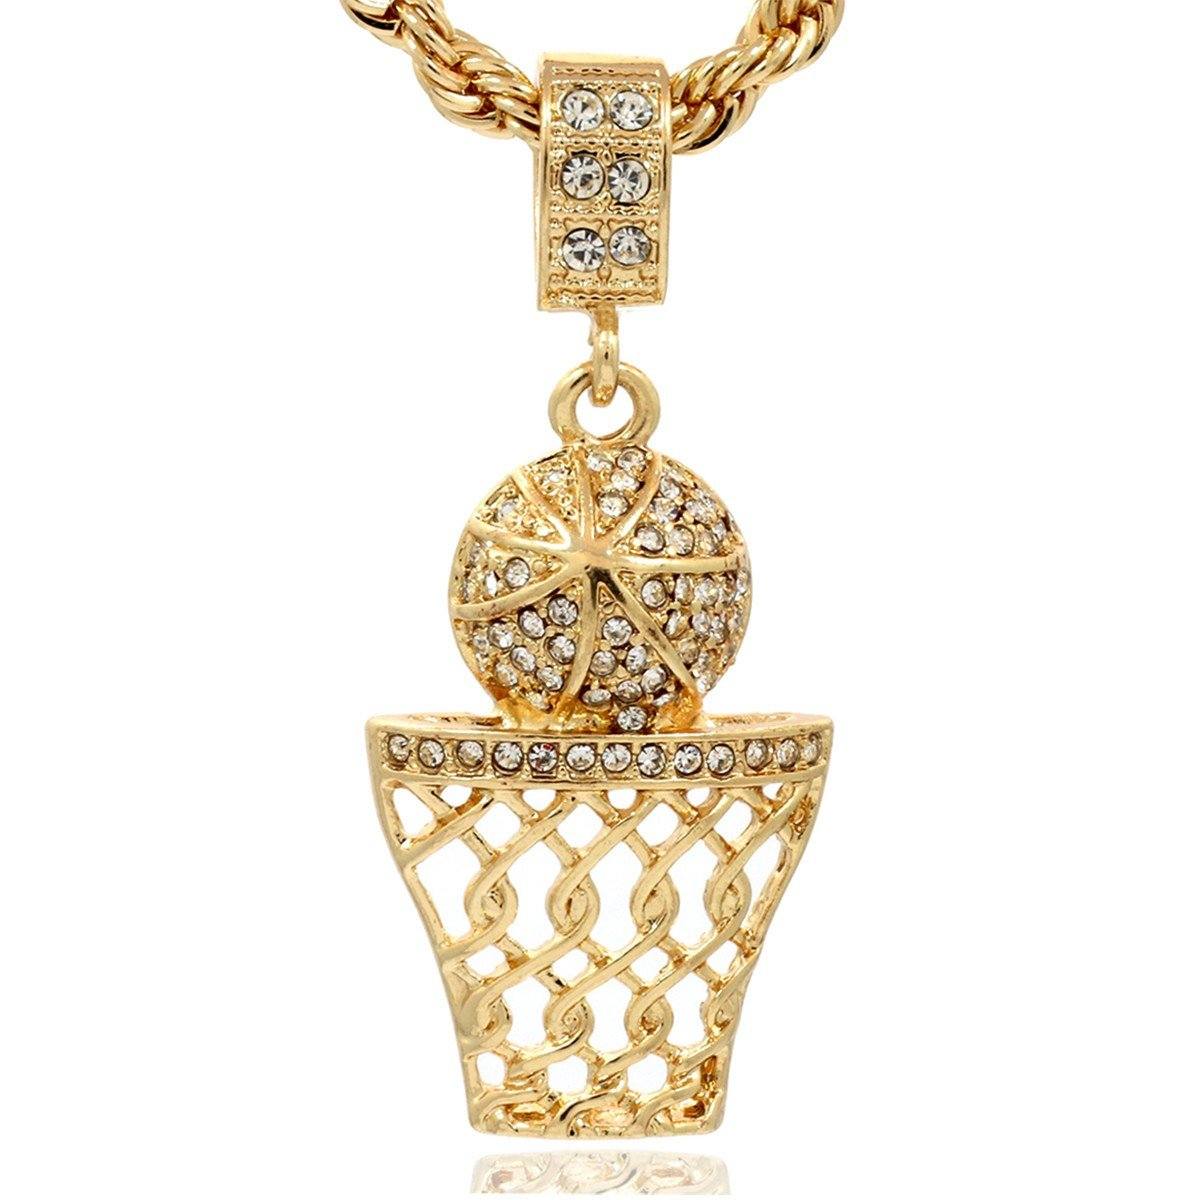 BASKET BALL PENDANT WITH GOLD ROPE CHAIN